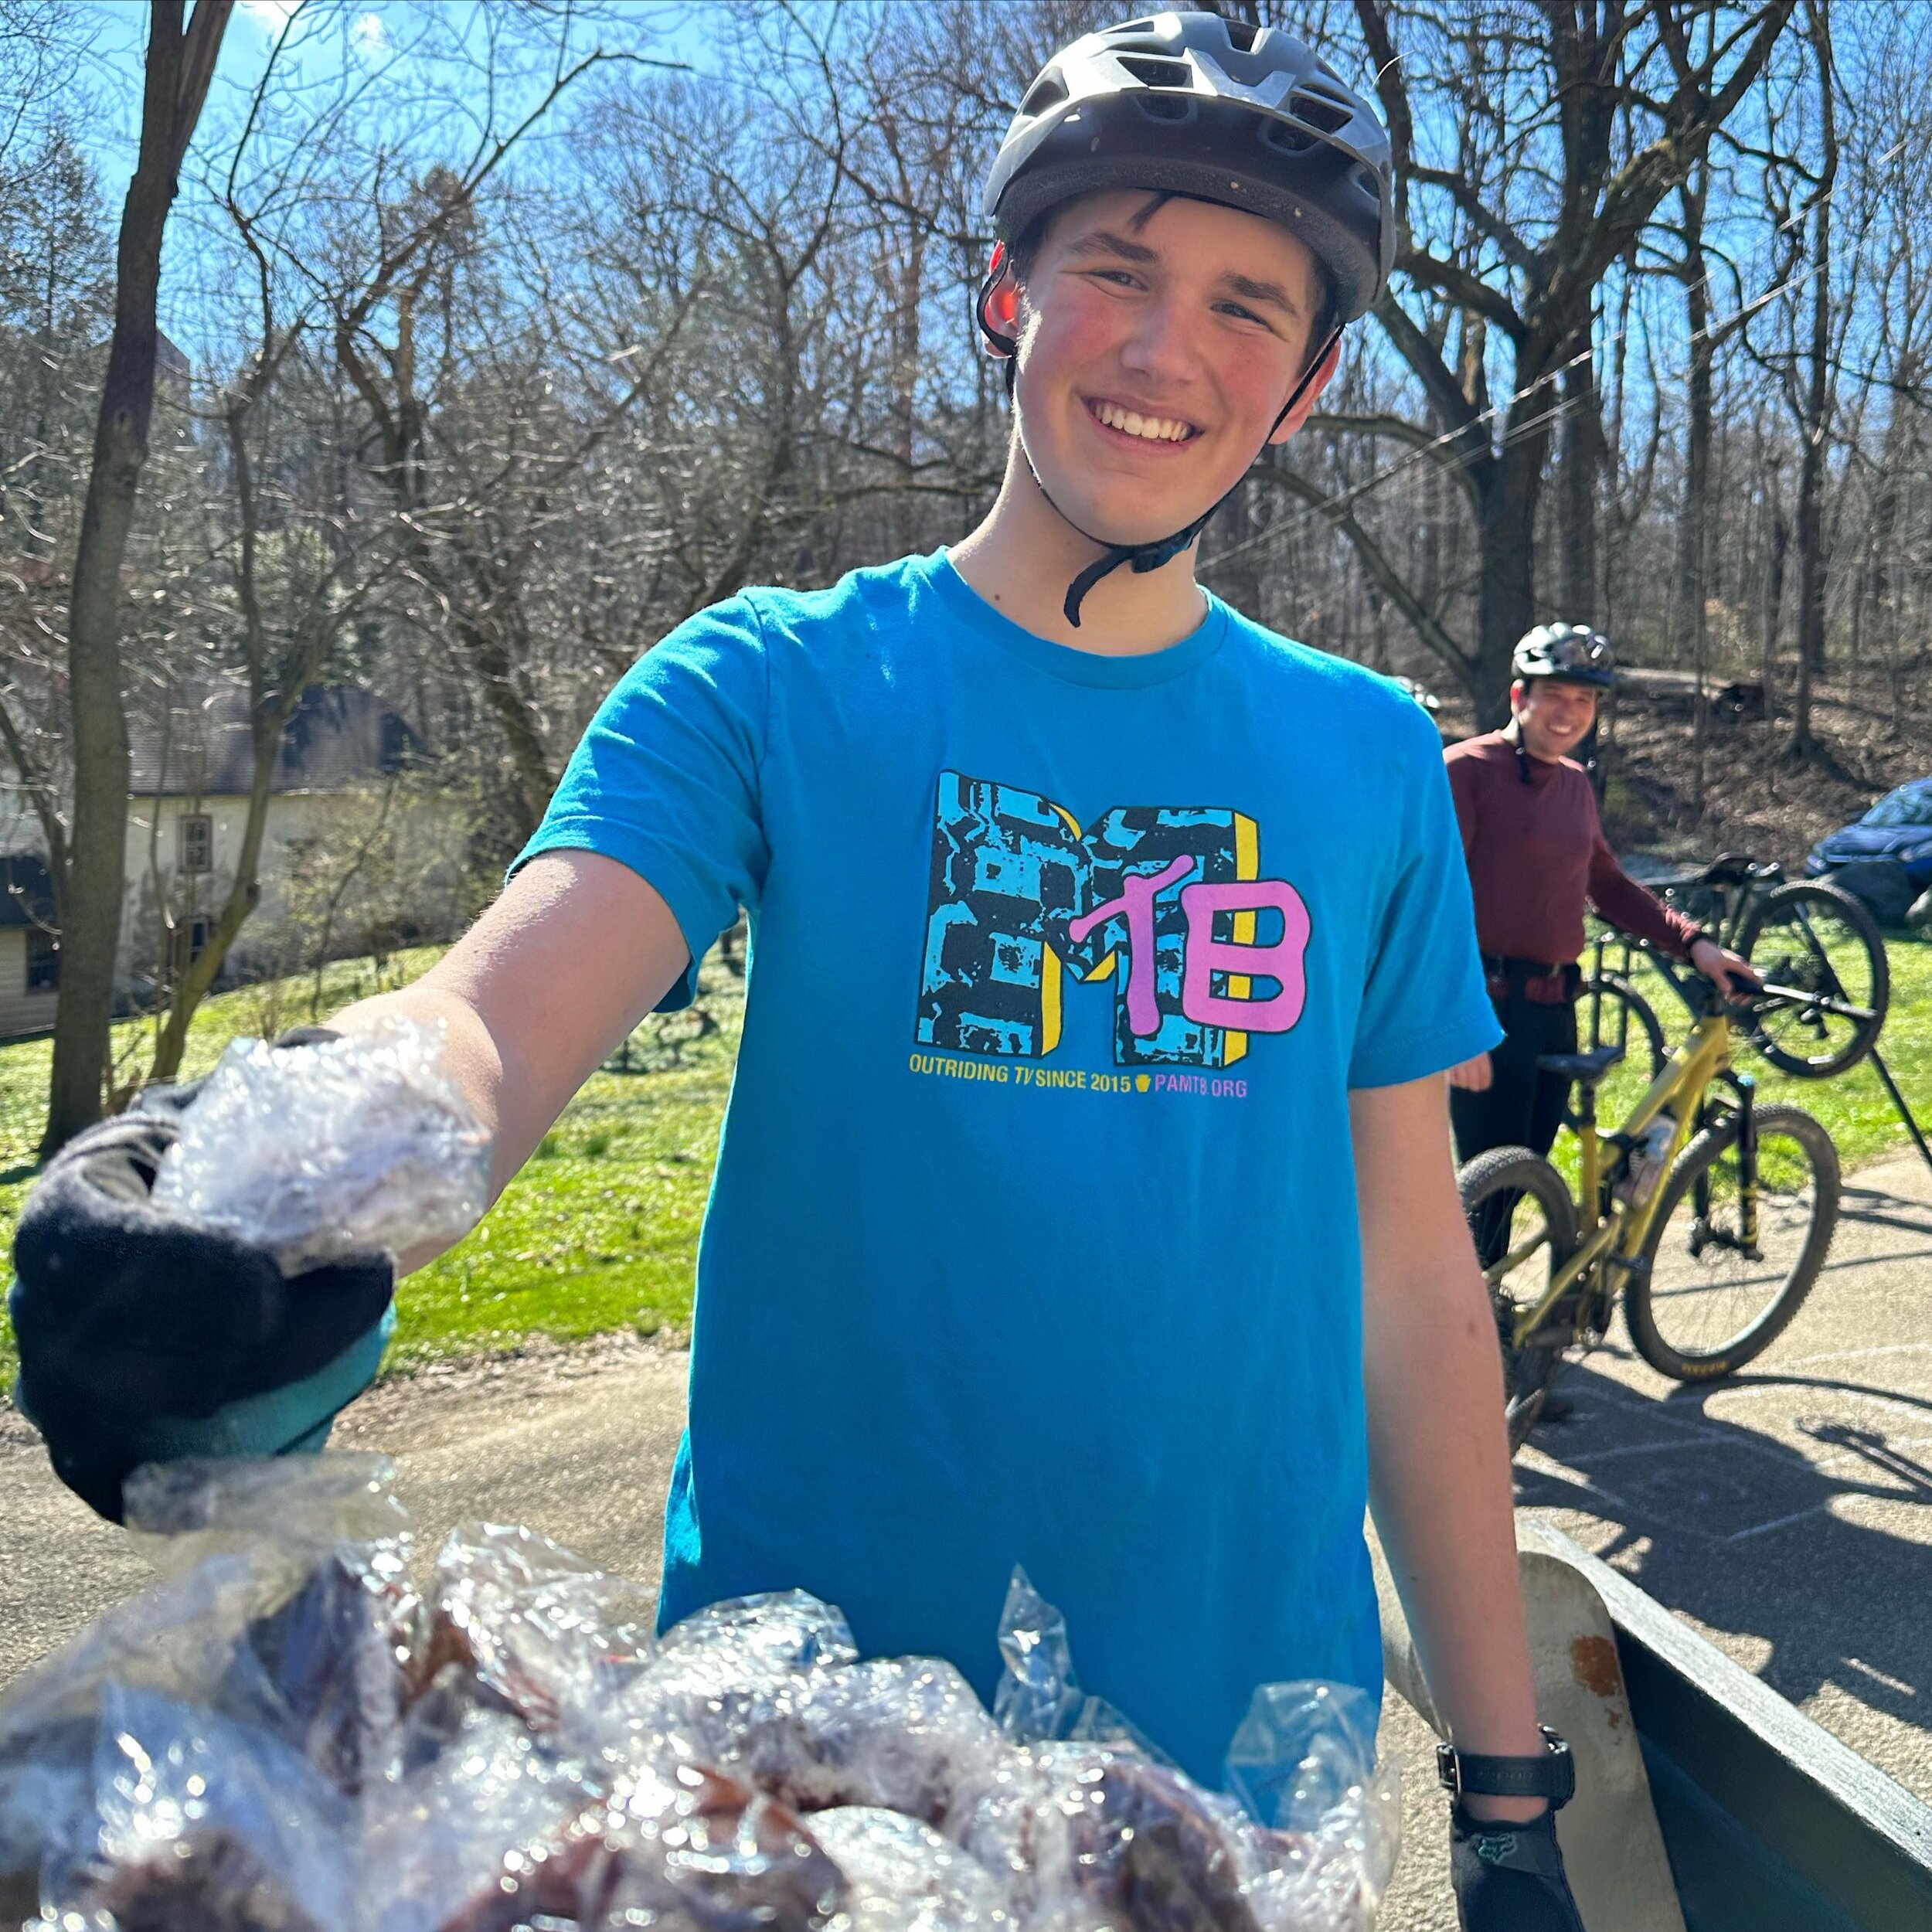 All of the best came together for the #phillybikeexpo Mtb ride this morning; awesome people, great weather and even some #picl riders! The group started  @papertrailbikecafe and finished with @grinduro whoopie pies! Tomorrow we&rsquo;ll start from th